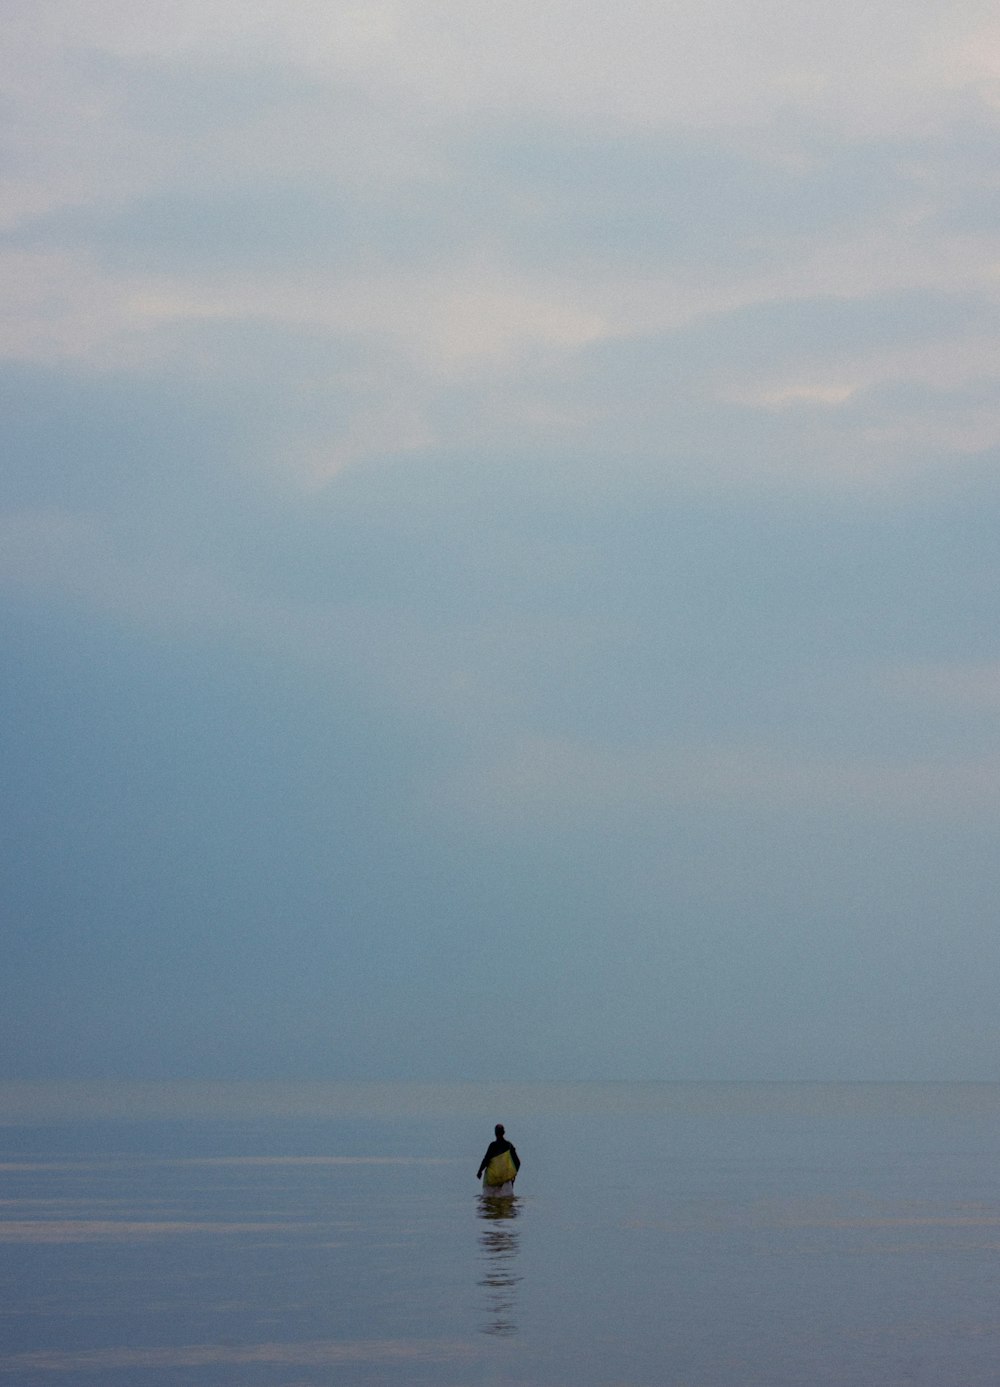 a person sitting on a surfboard in the middle of the ocean